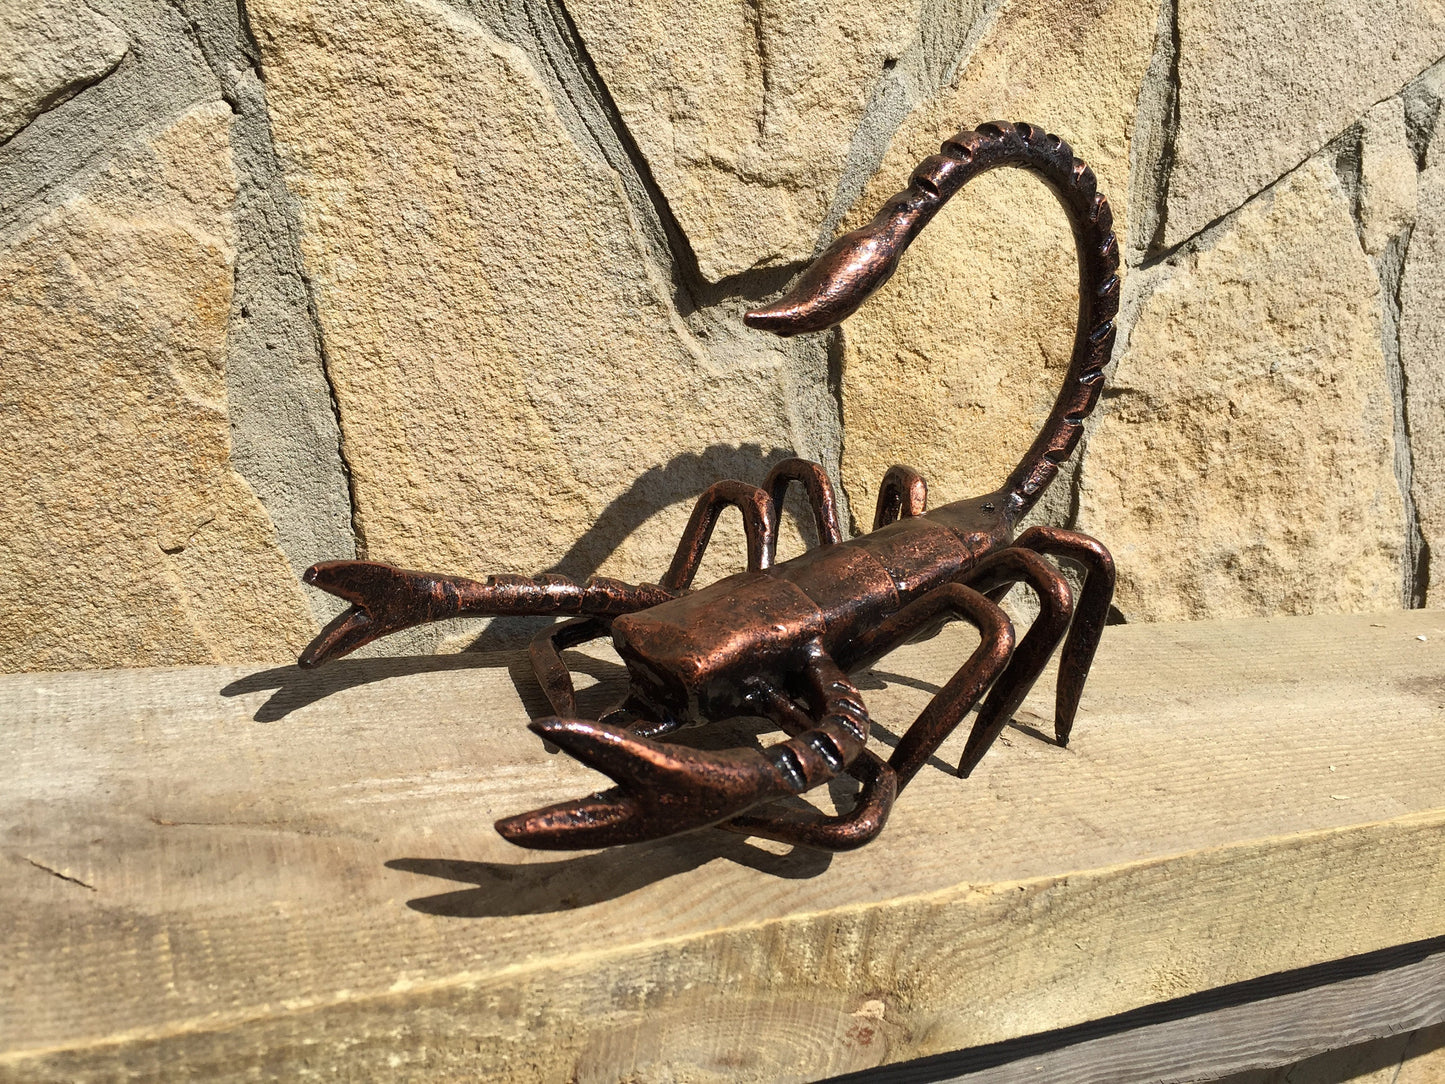 Metal scorpion, forged scorpion, scorpion figurine, arachnid sculpture, metal sculpture, metal statue, art object, metal insect, spider